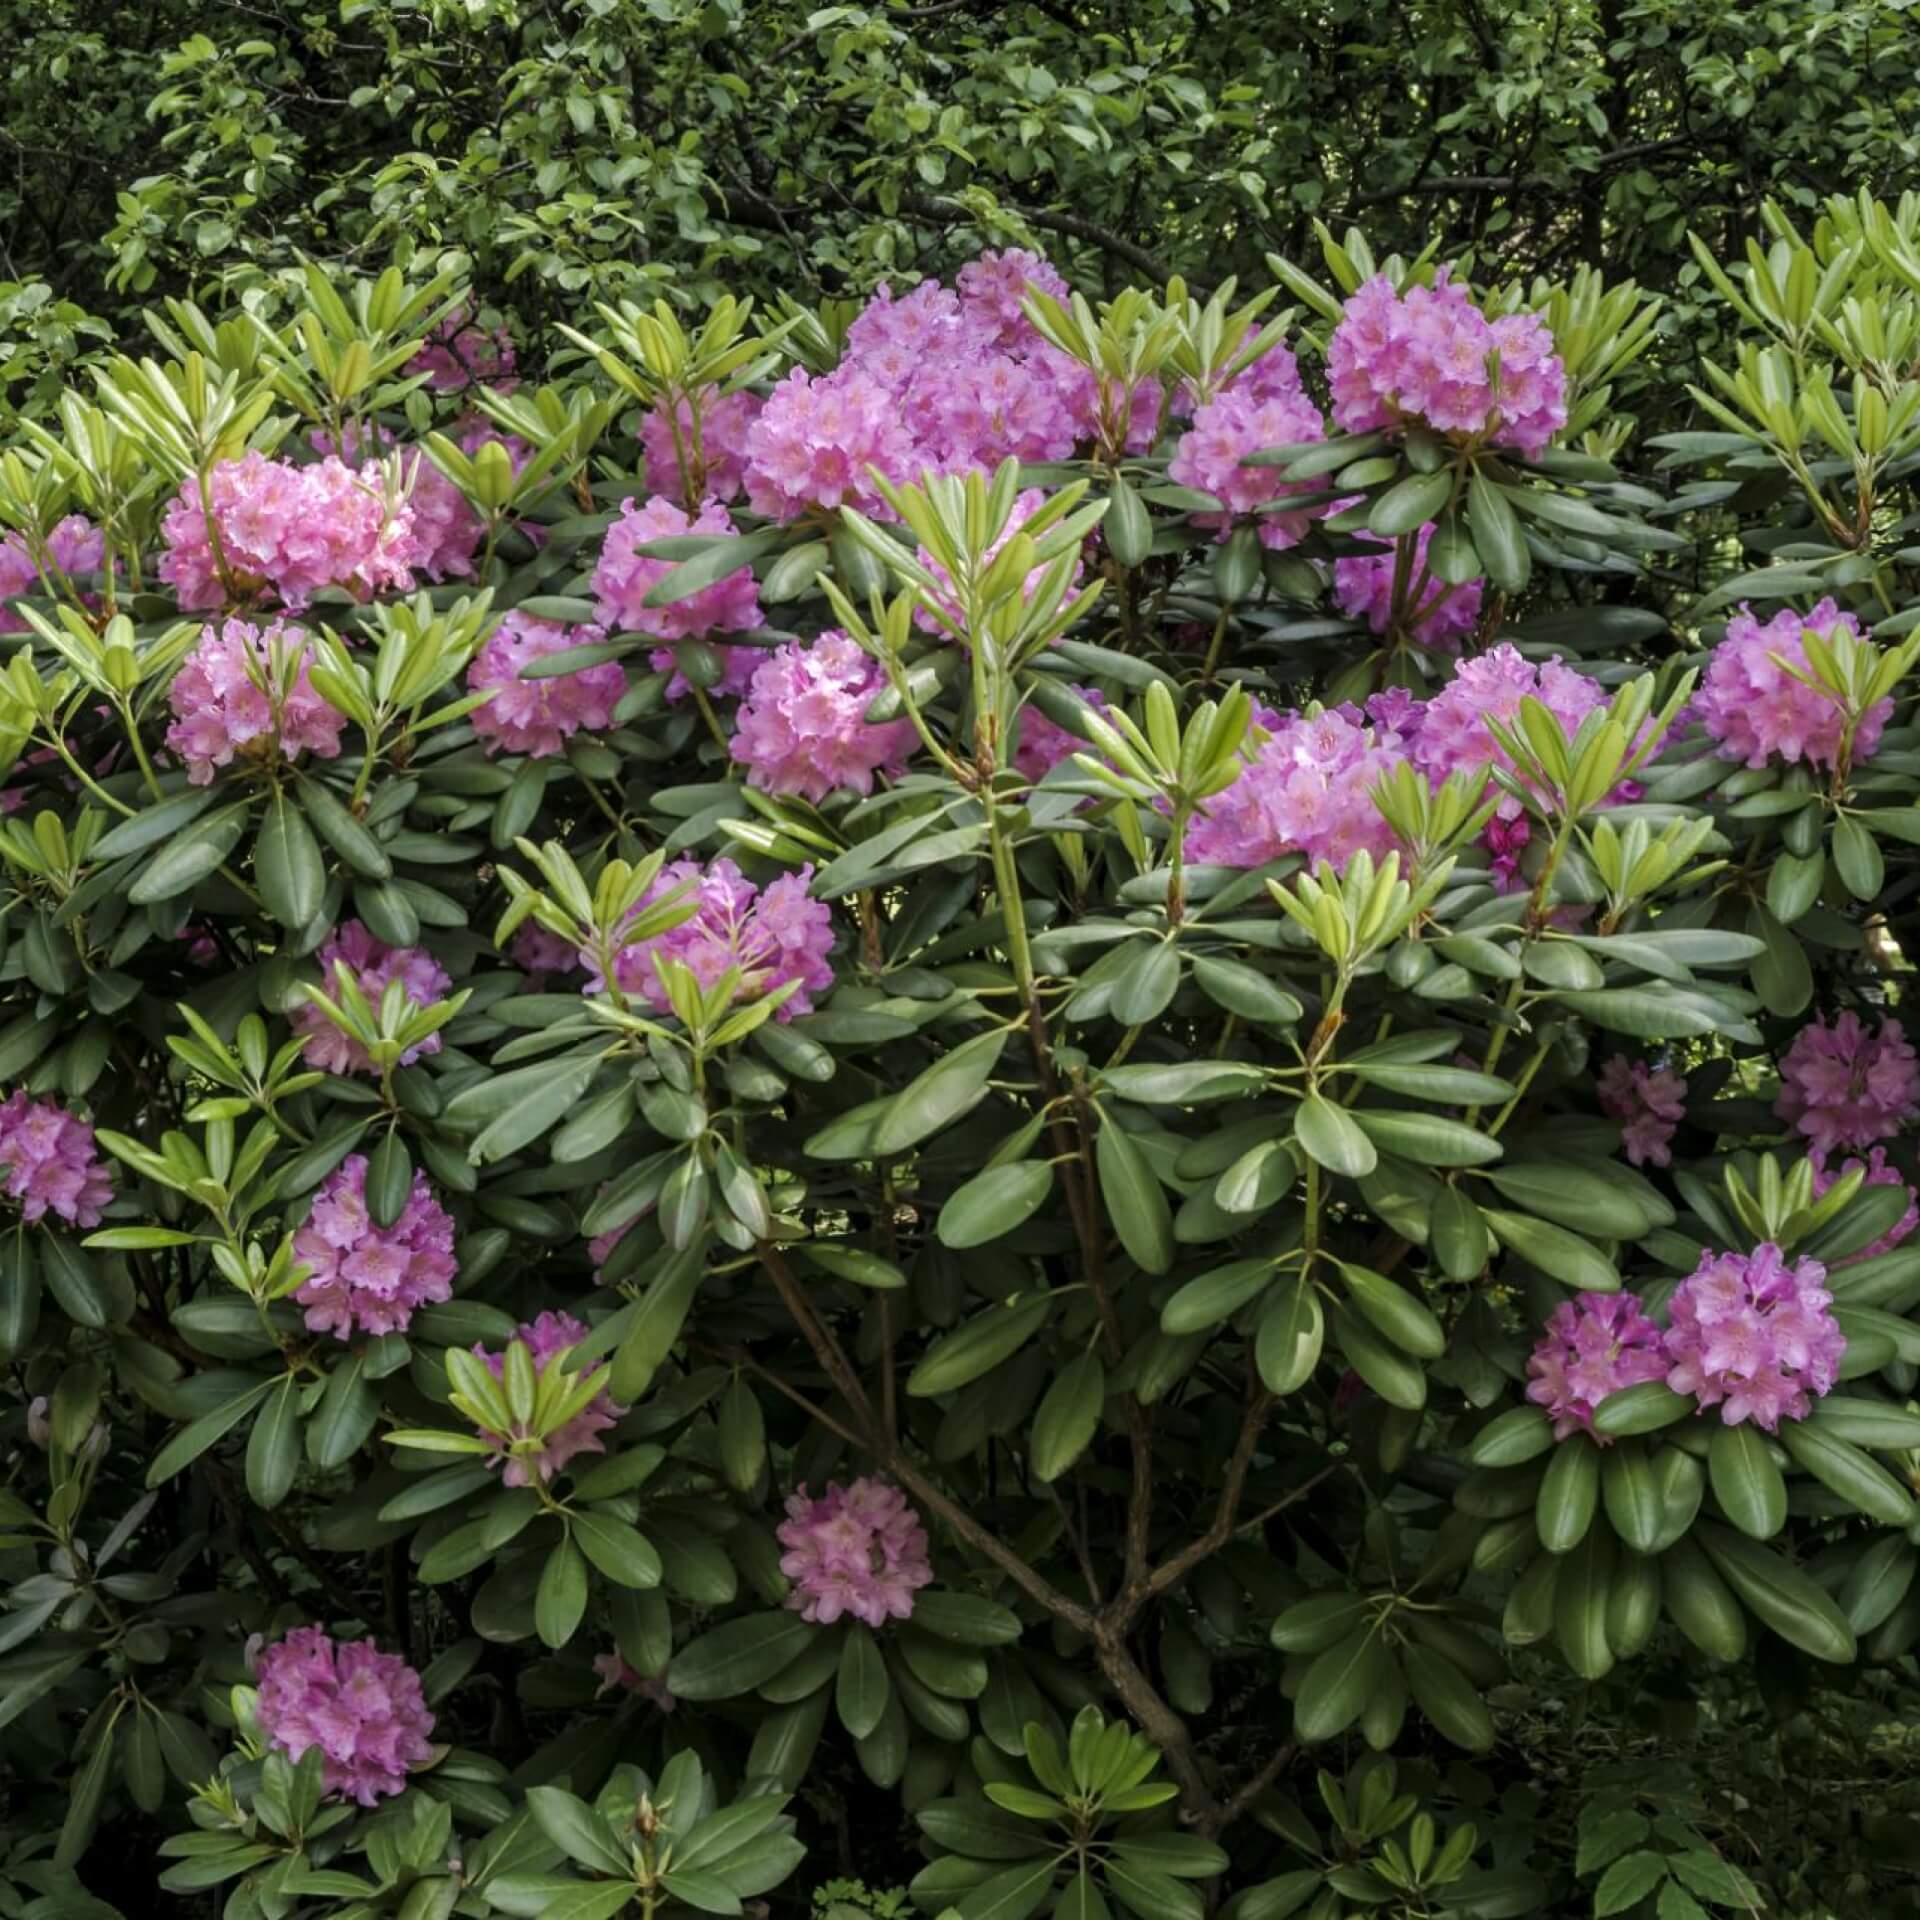 Catawba-Rhododendron (Rhododendron catawbiense)